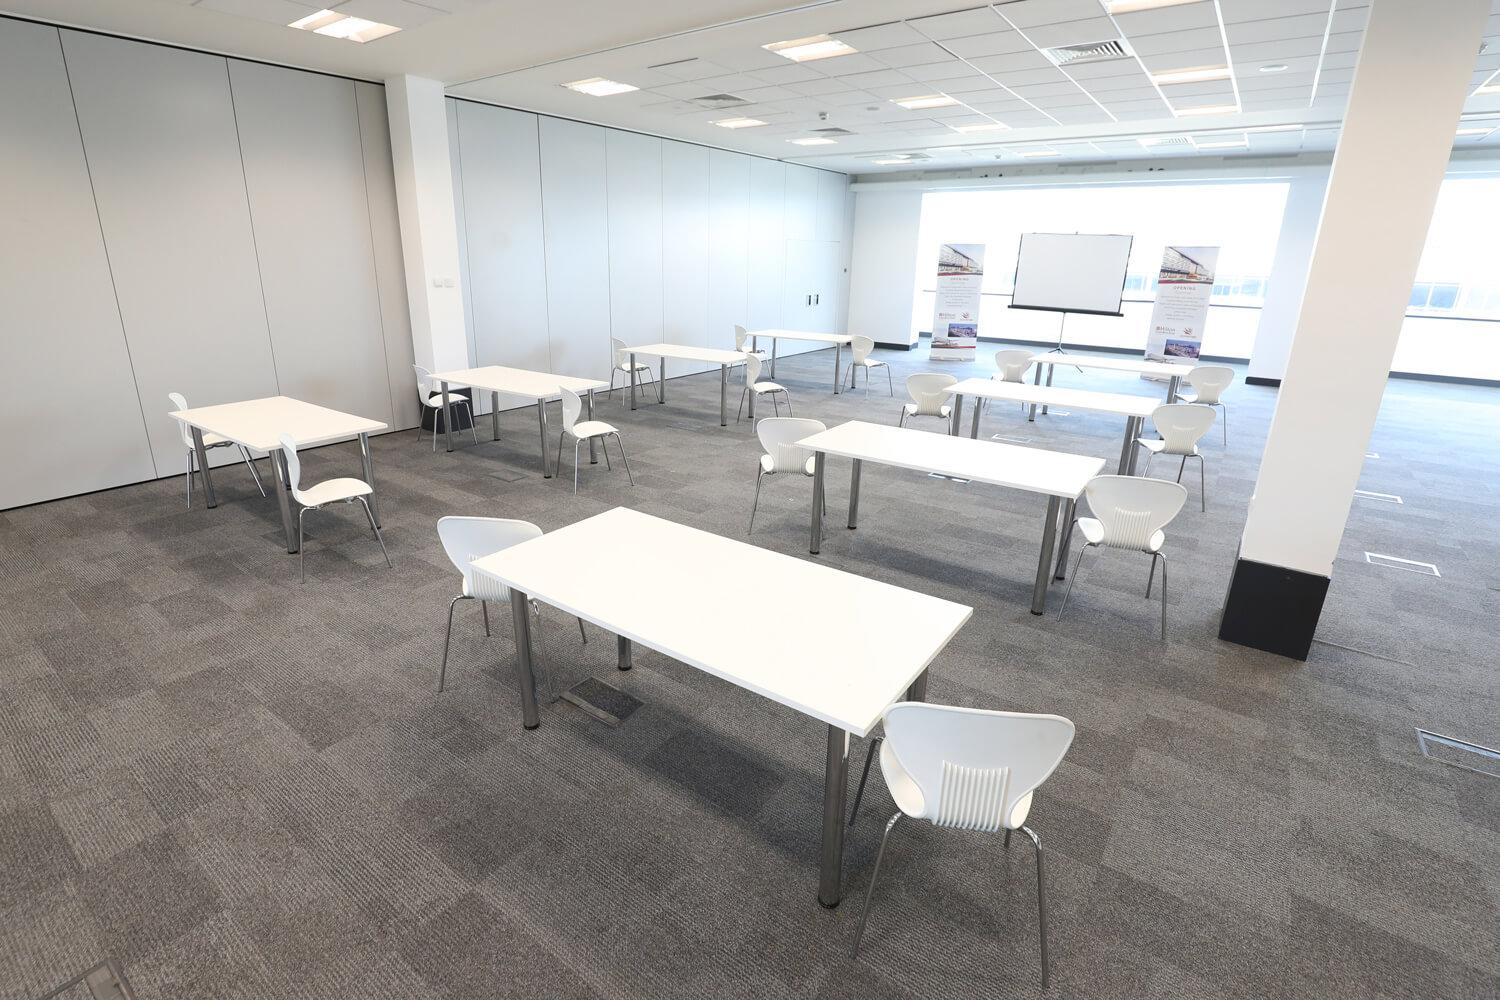 Meeting rooms and breakout spaces at Silverstone